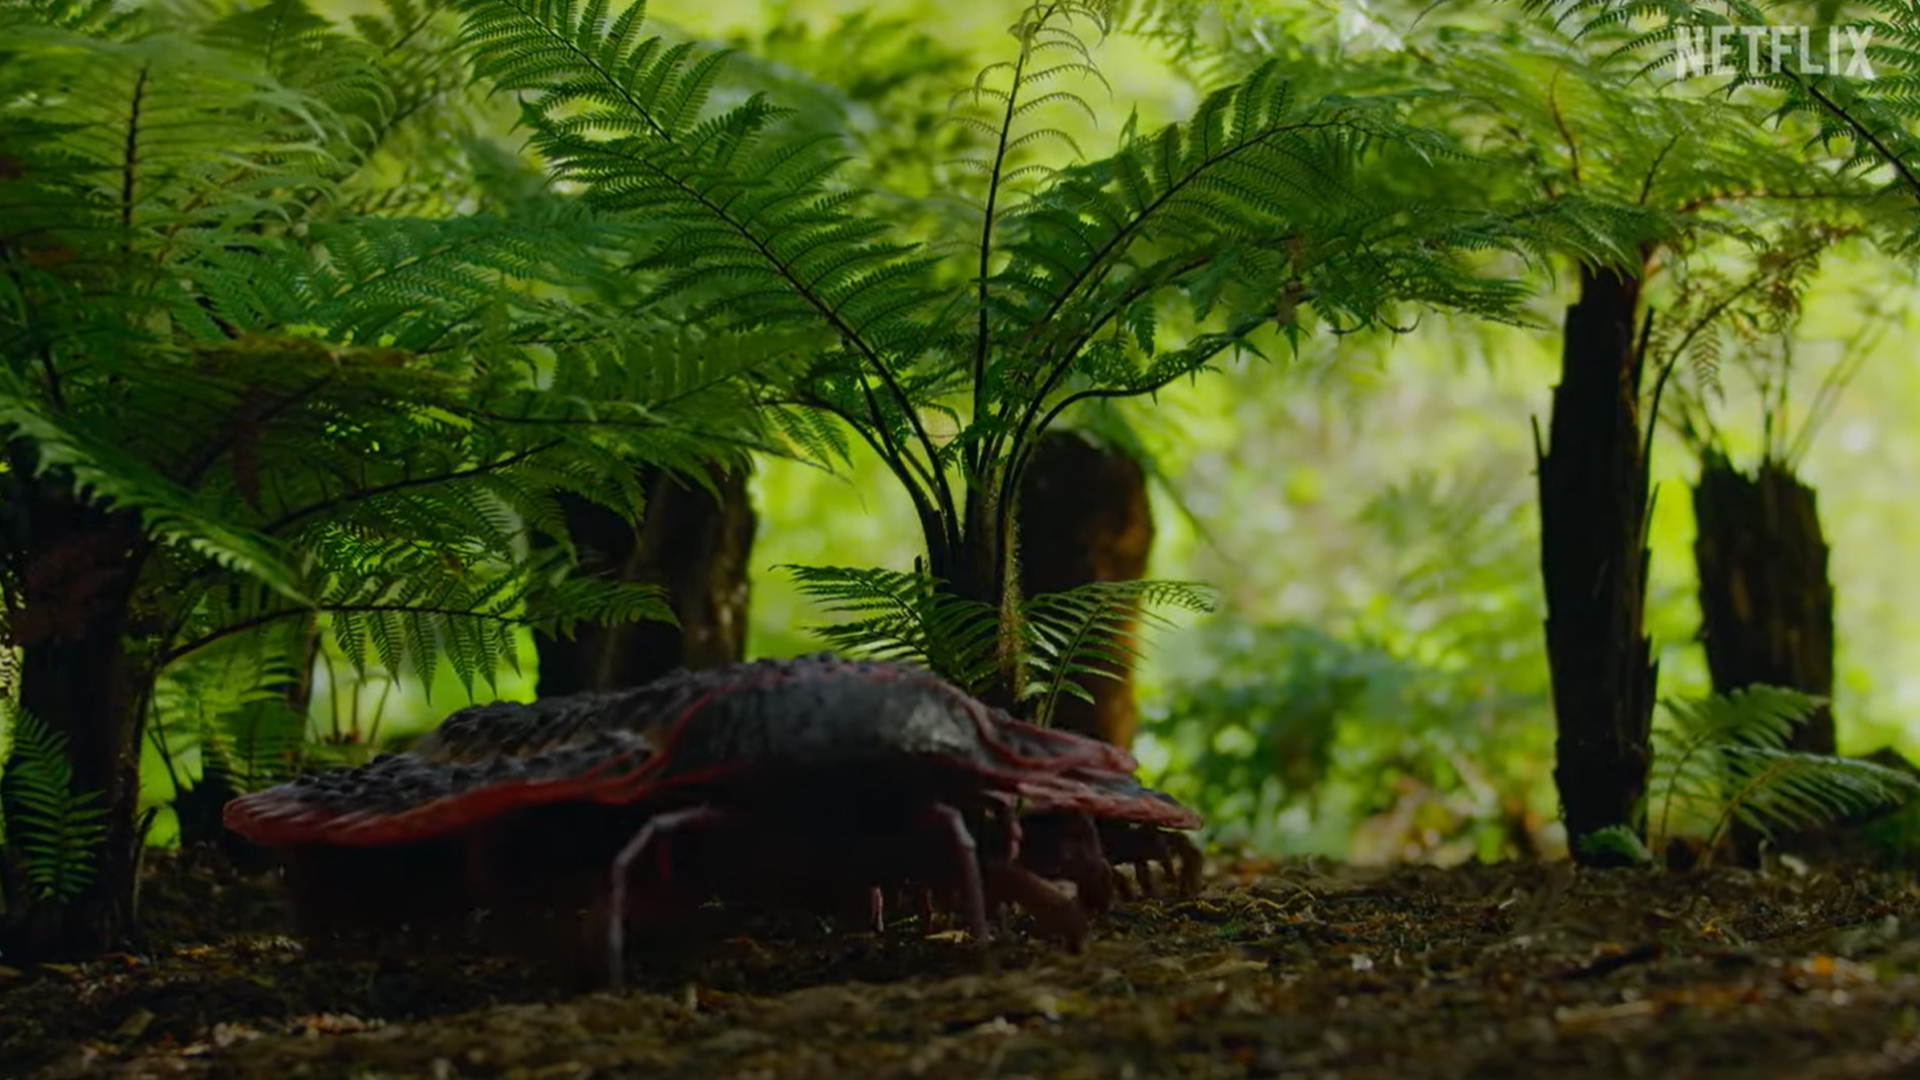 Reconstruction of ancient giant millipede from Netflix's "Life on Our Planet."